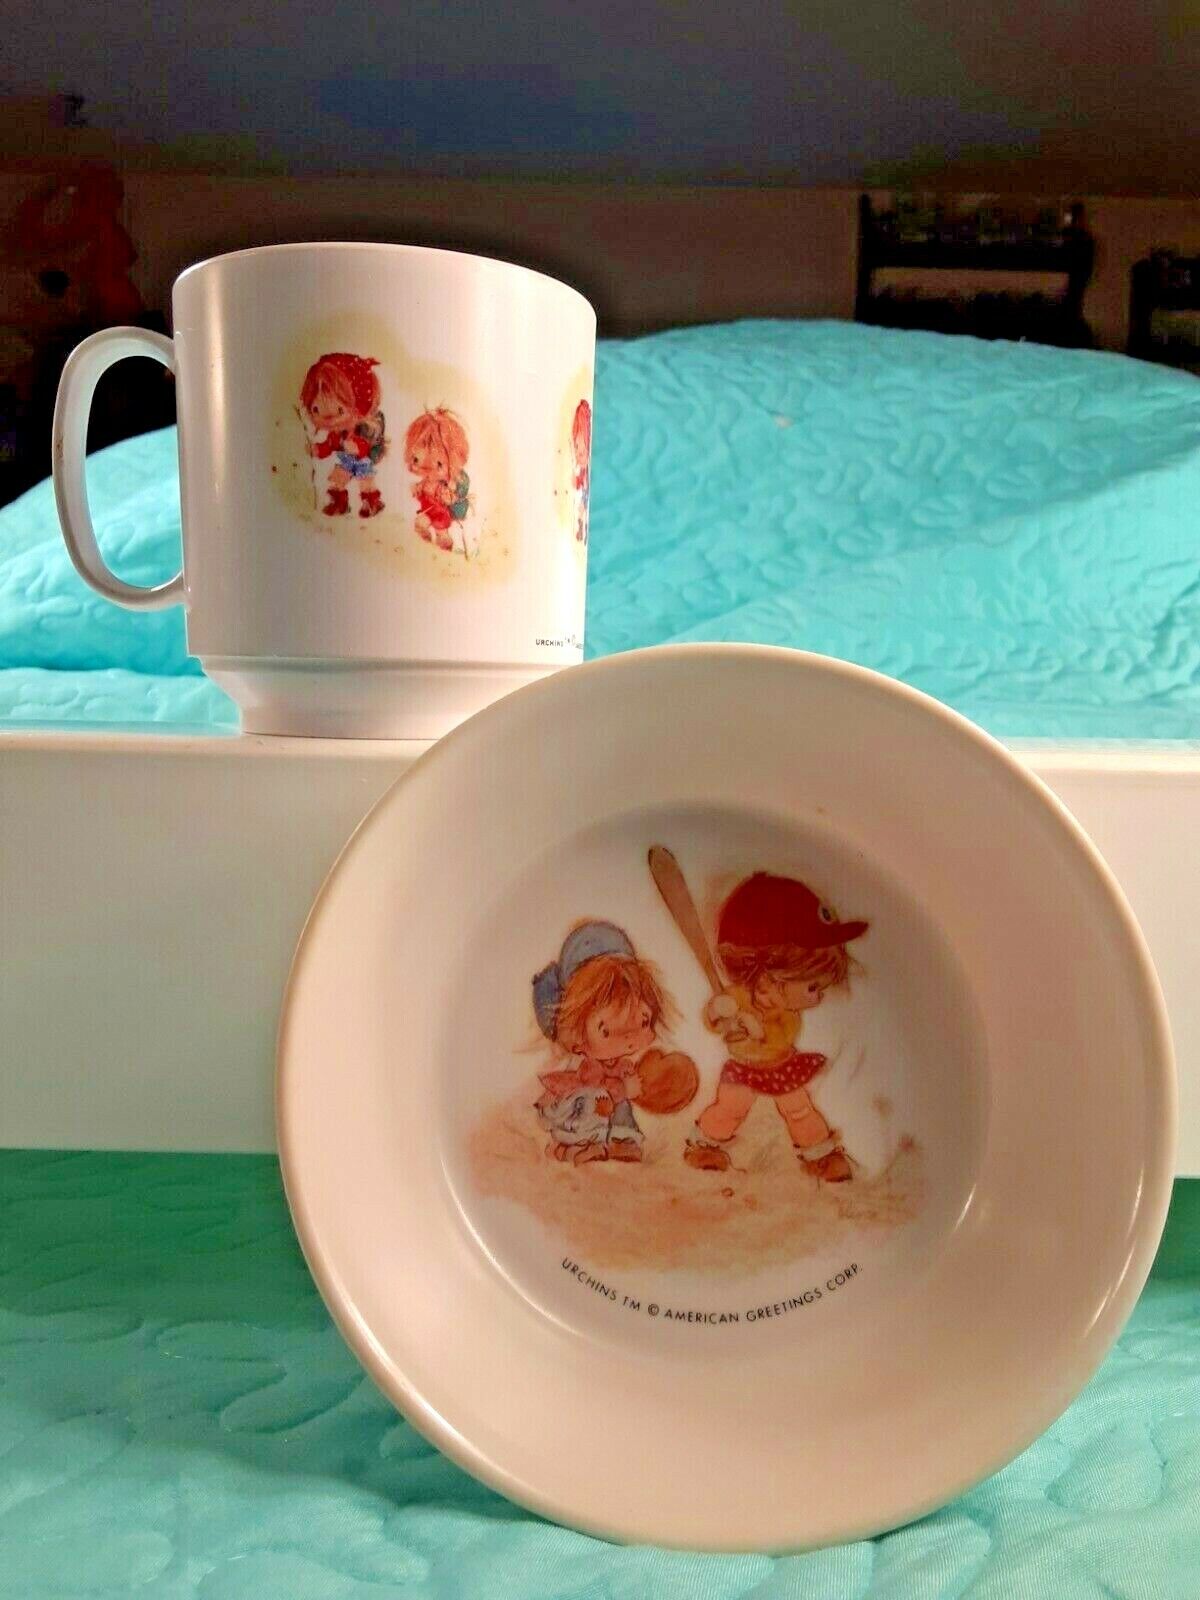 URCHINS Oneida Ware American Greetings Melamine Childs Bowl and Cup Vintage 1974